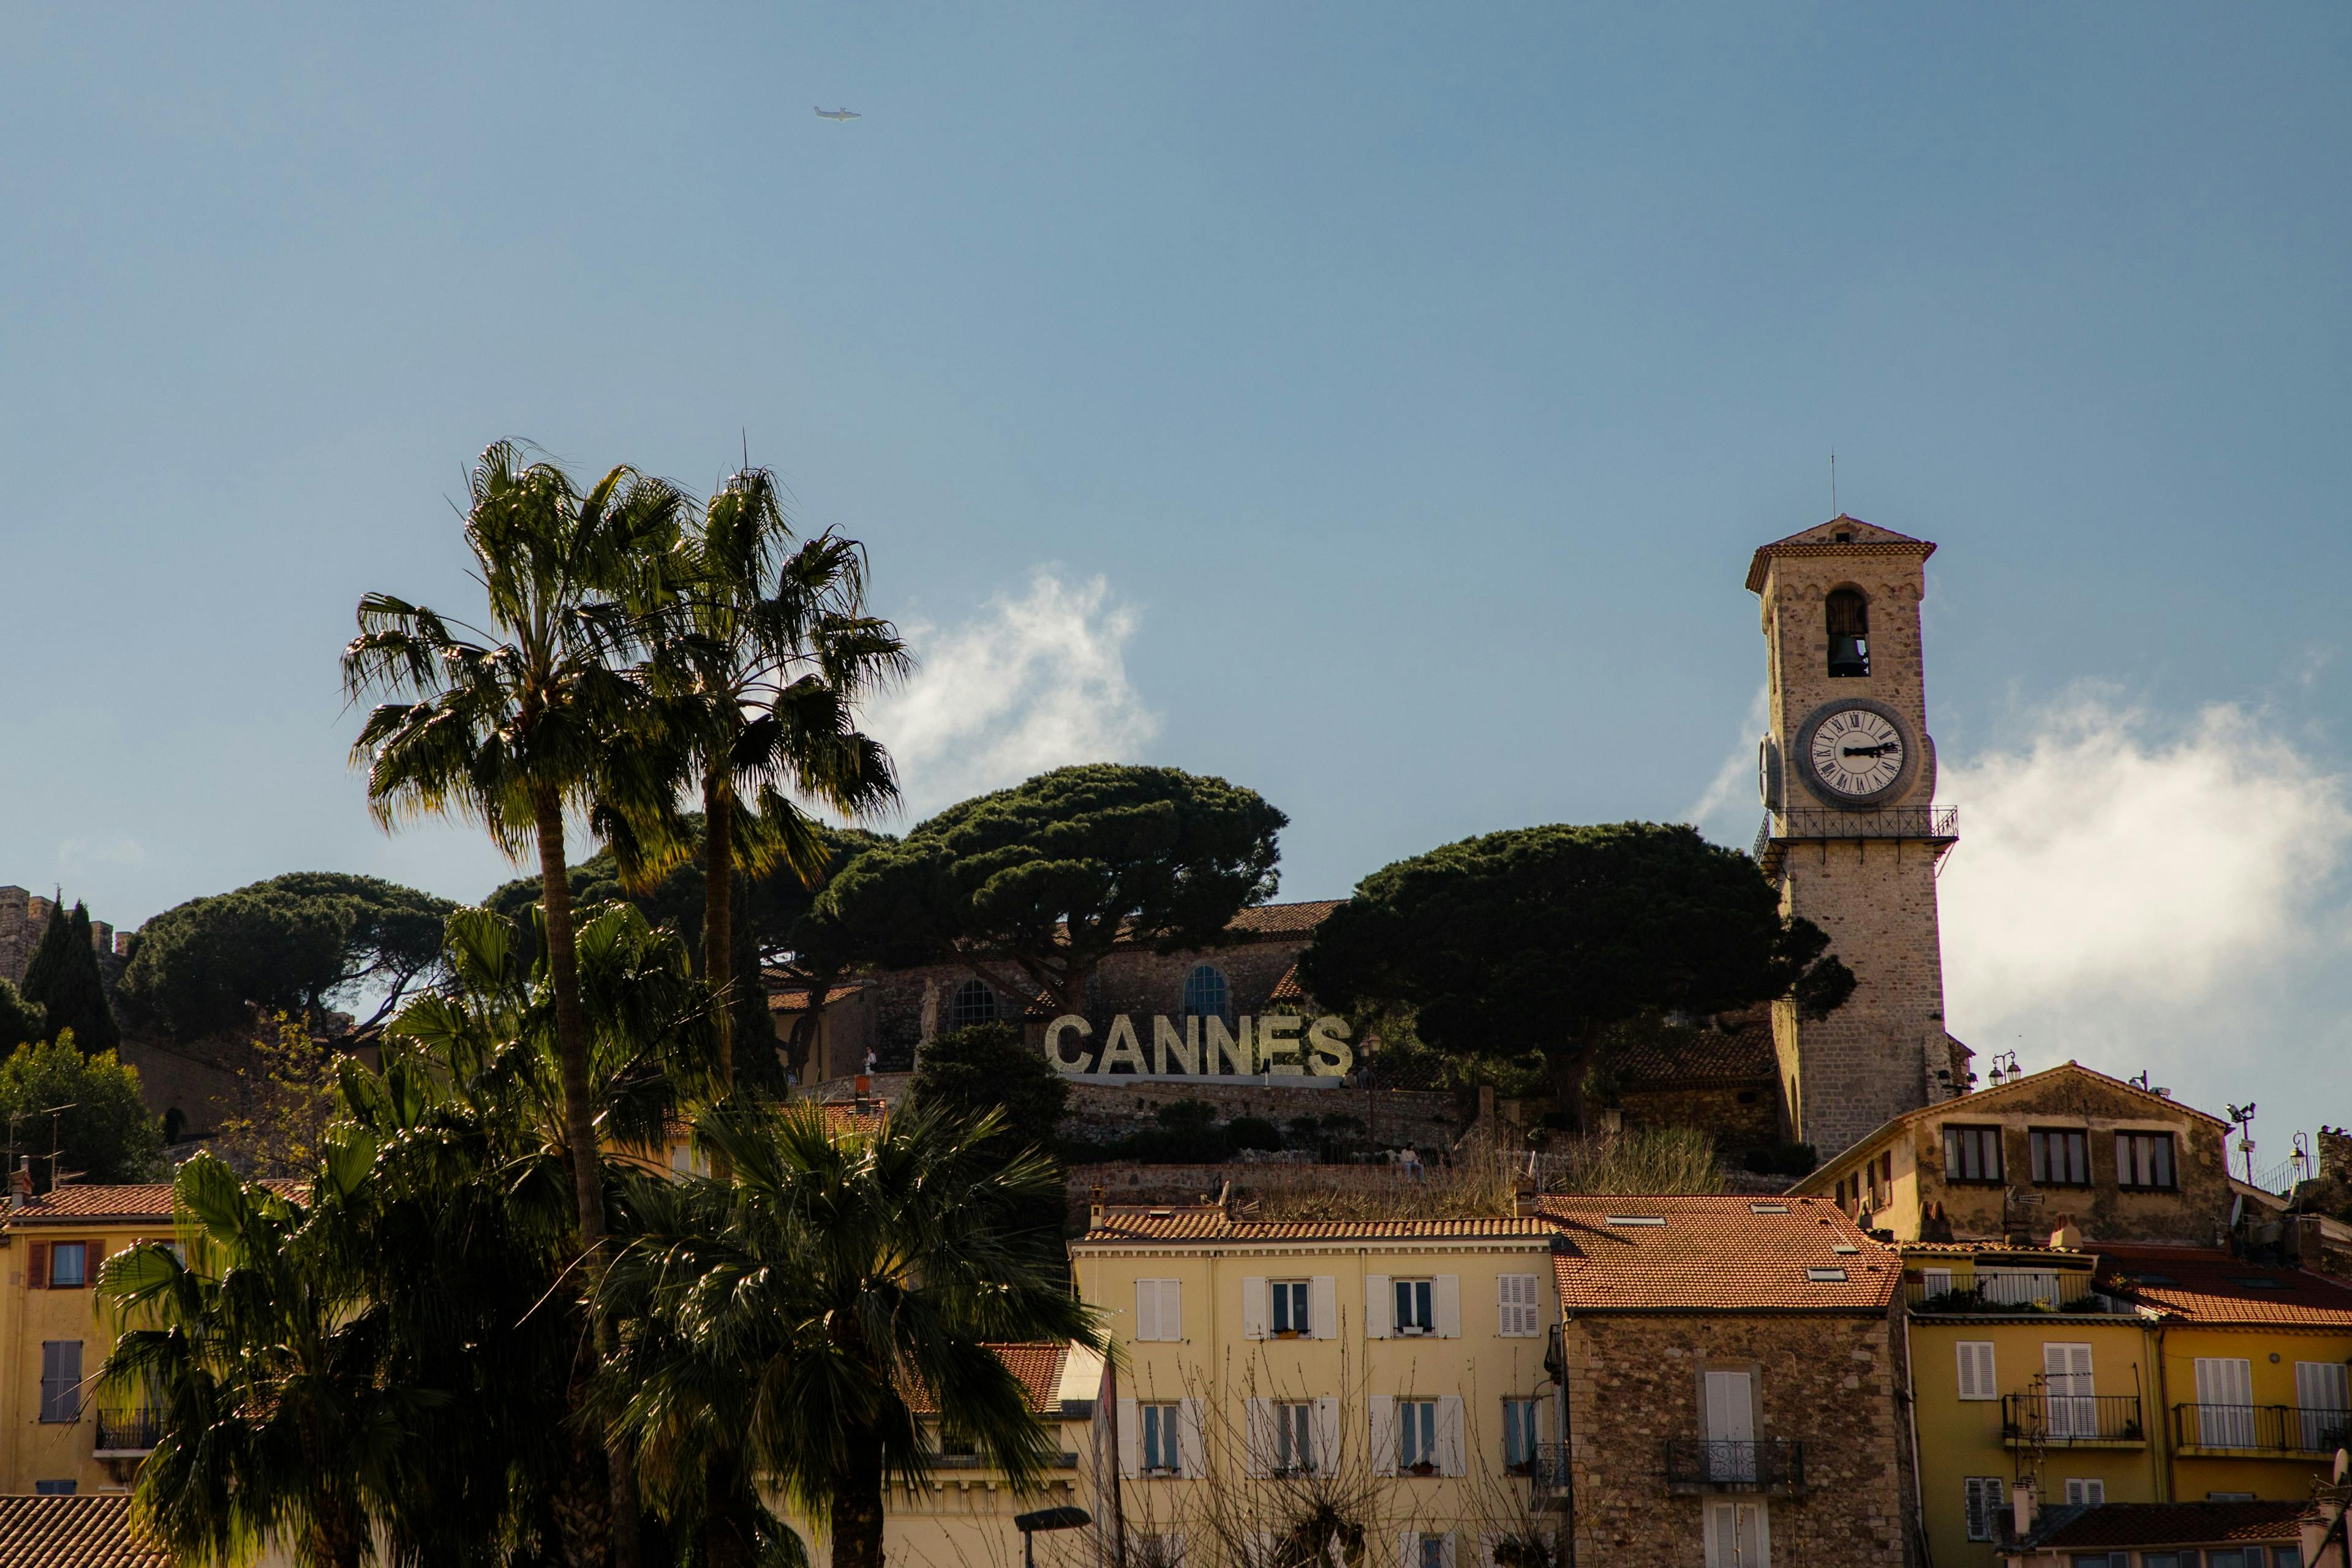 Cannes old town in France